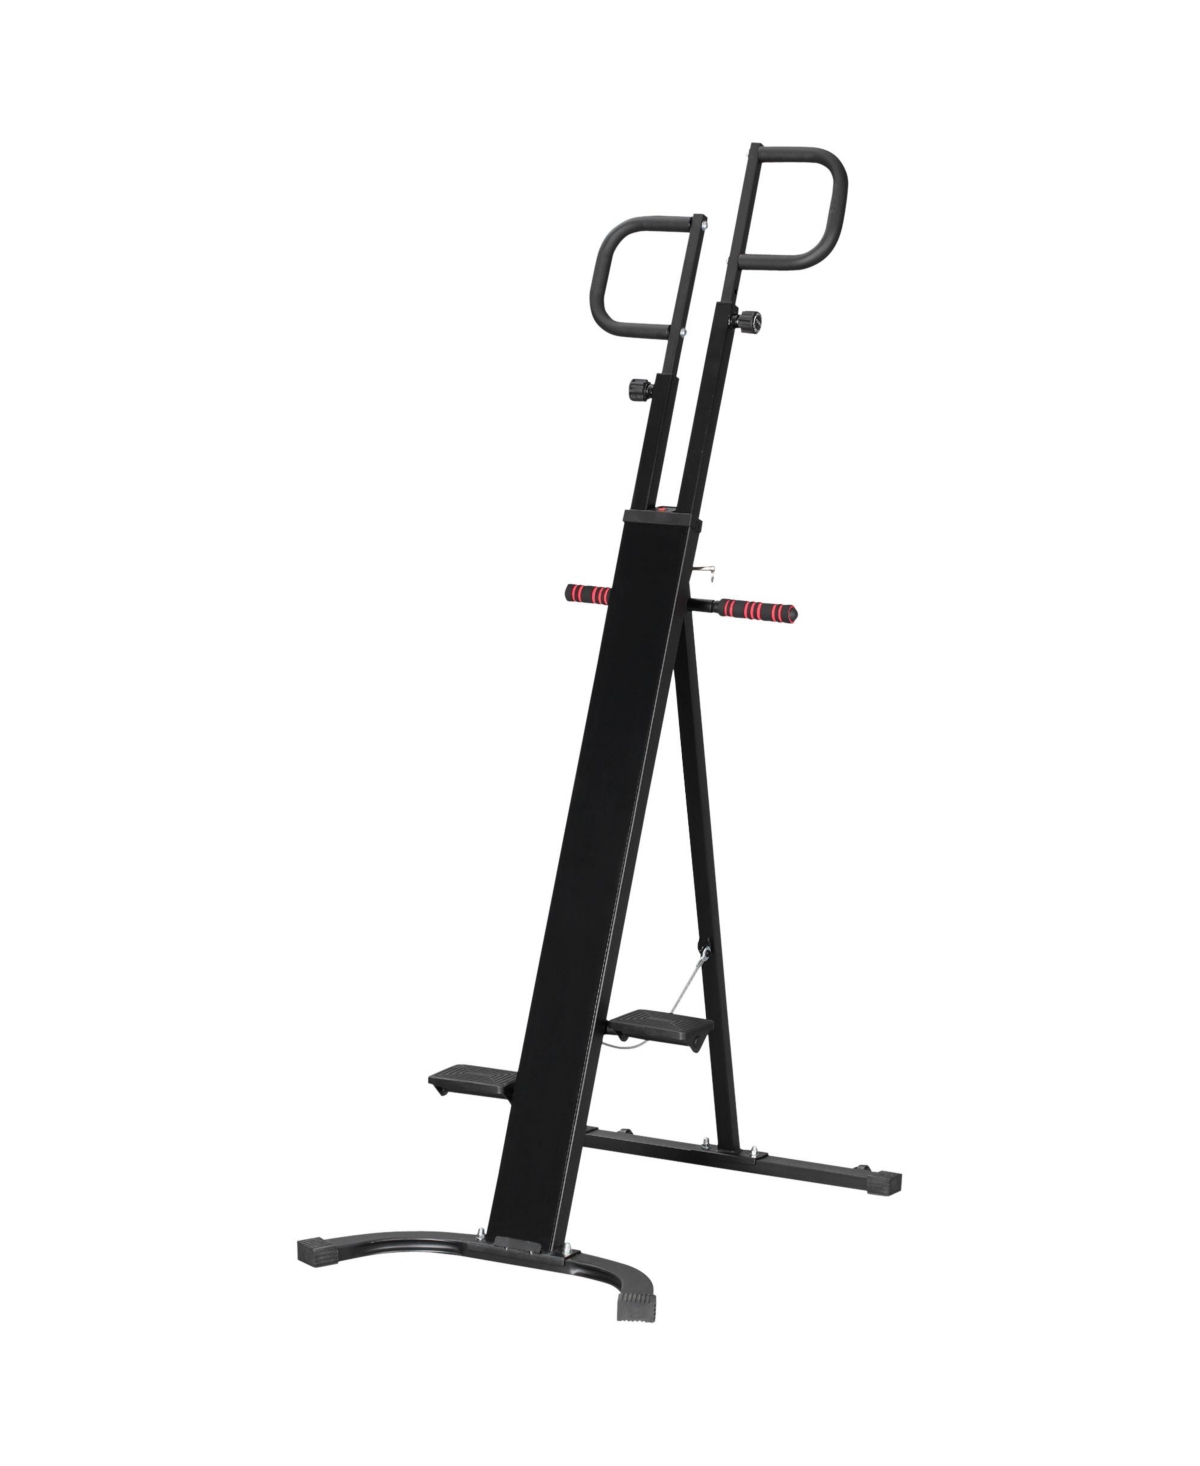 Soozier Folding Vertical Climber Exercise Machine, Height Adjustable ...